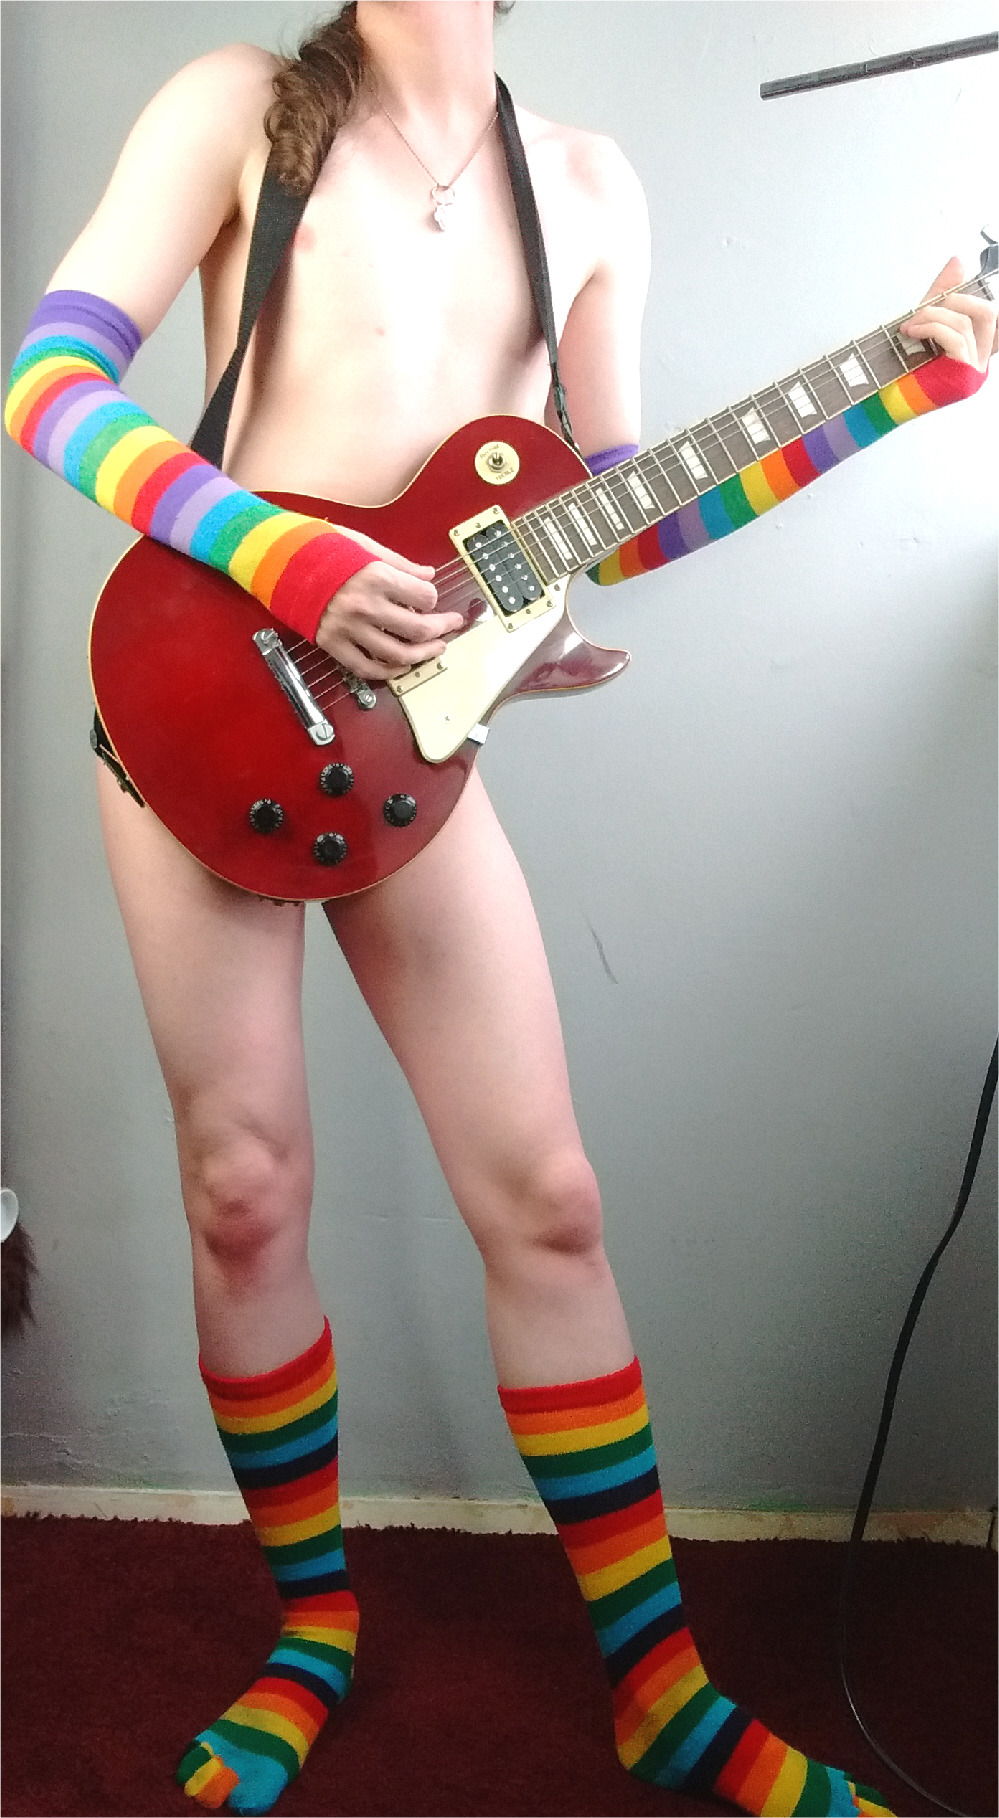 What’s the point of owning guitars if you can’t pose nude with them?